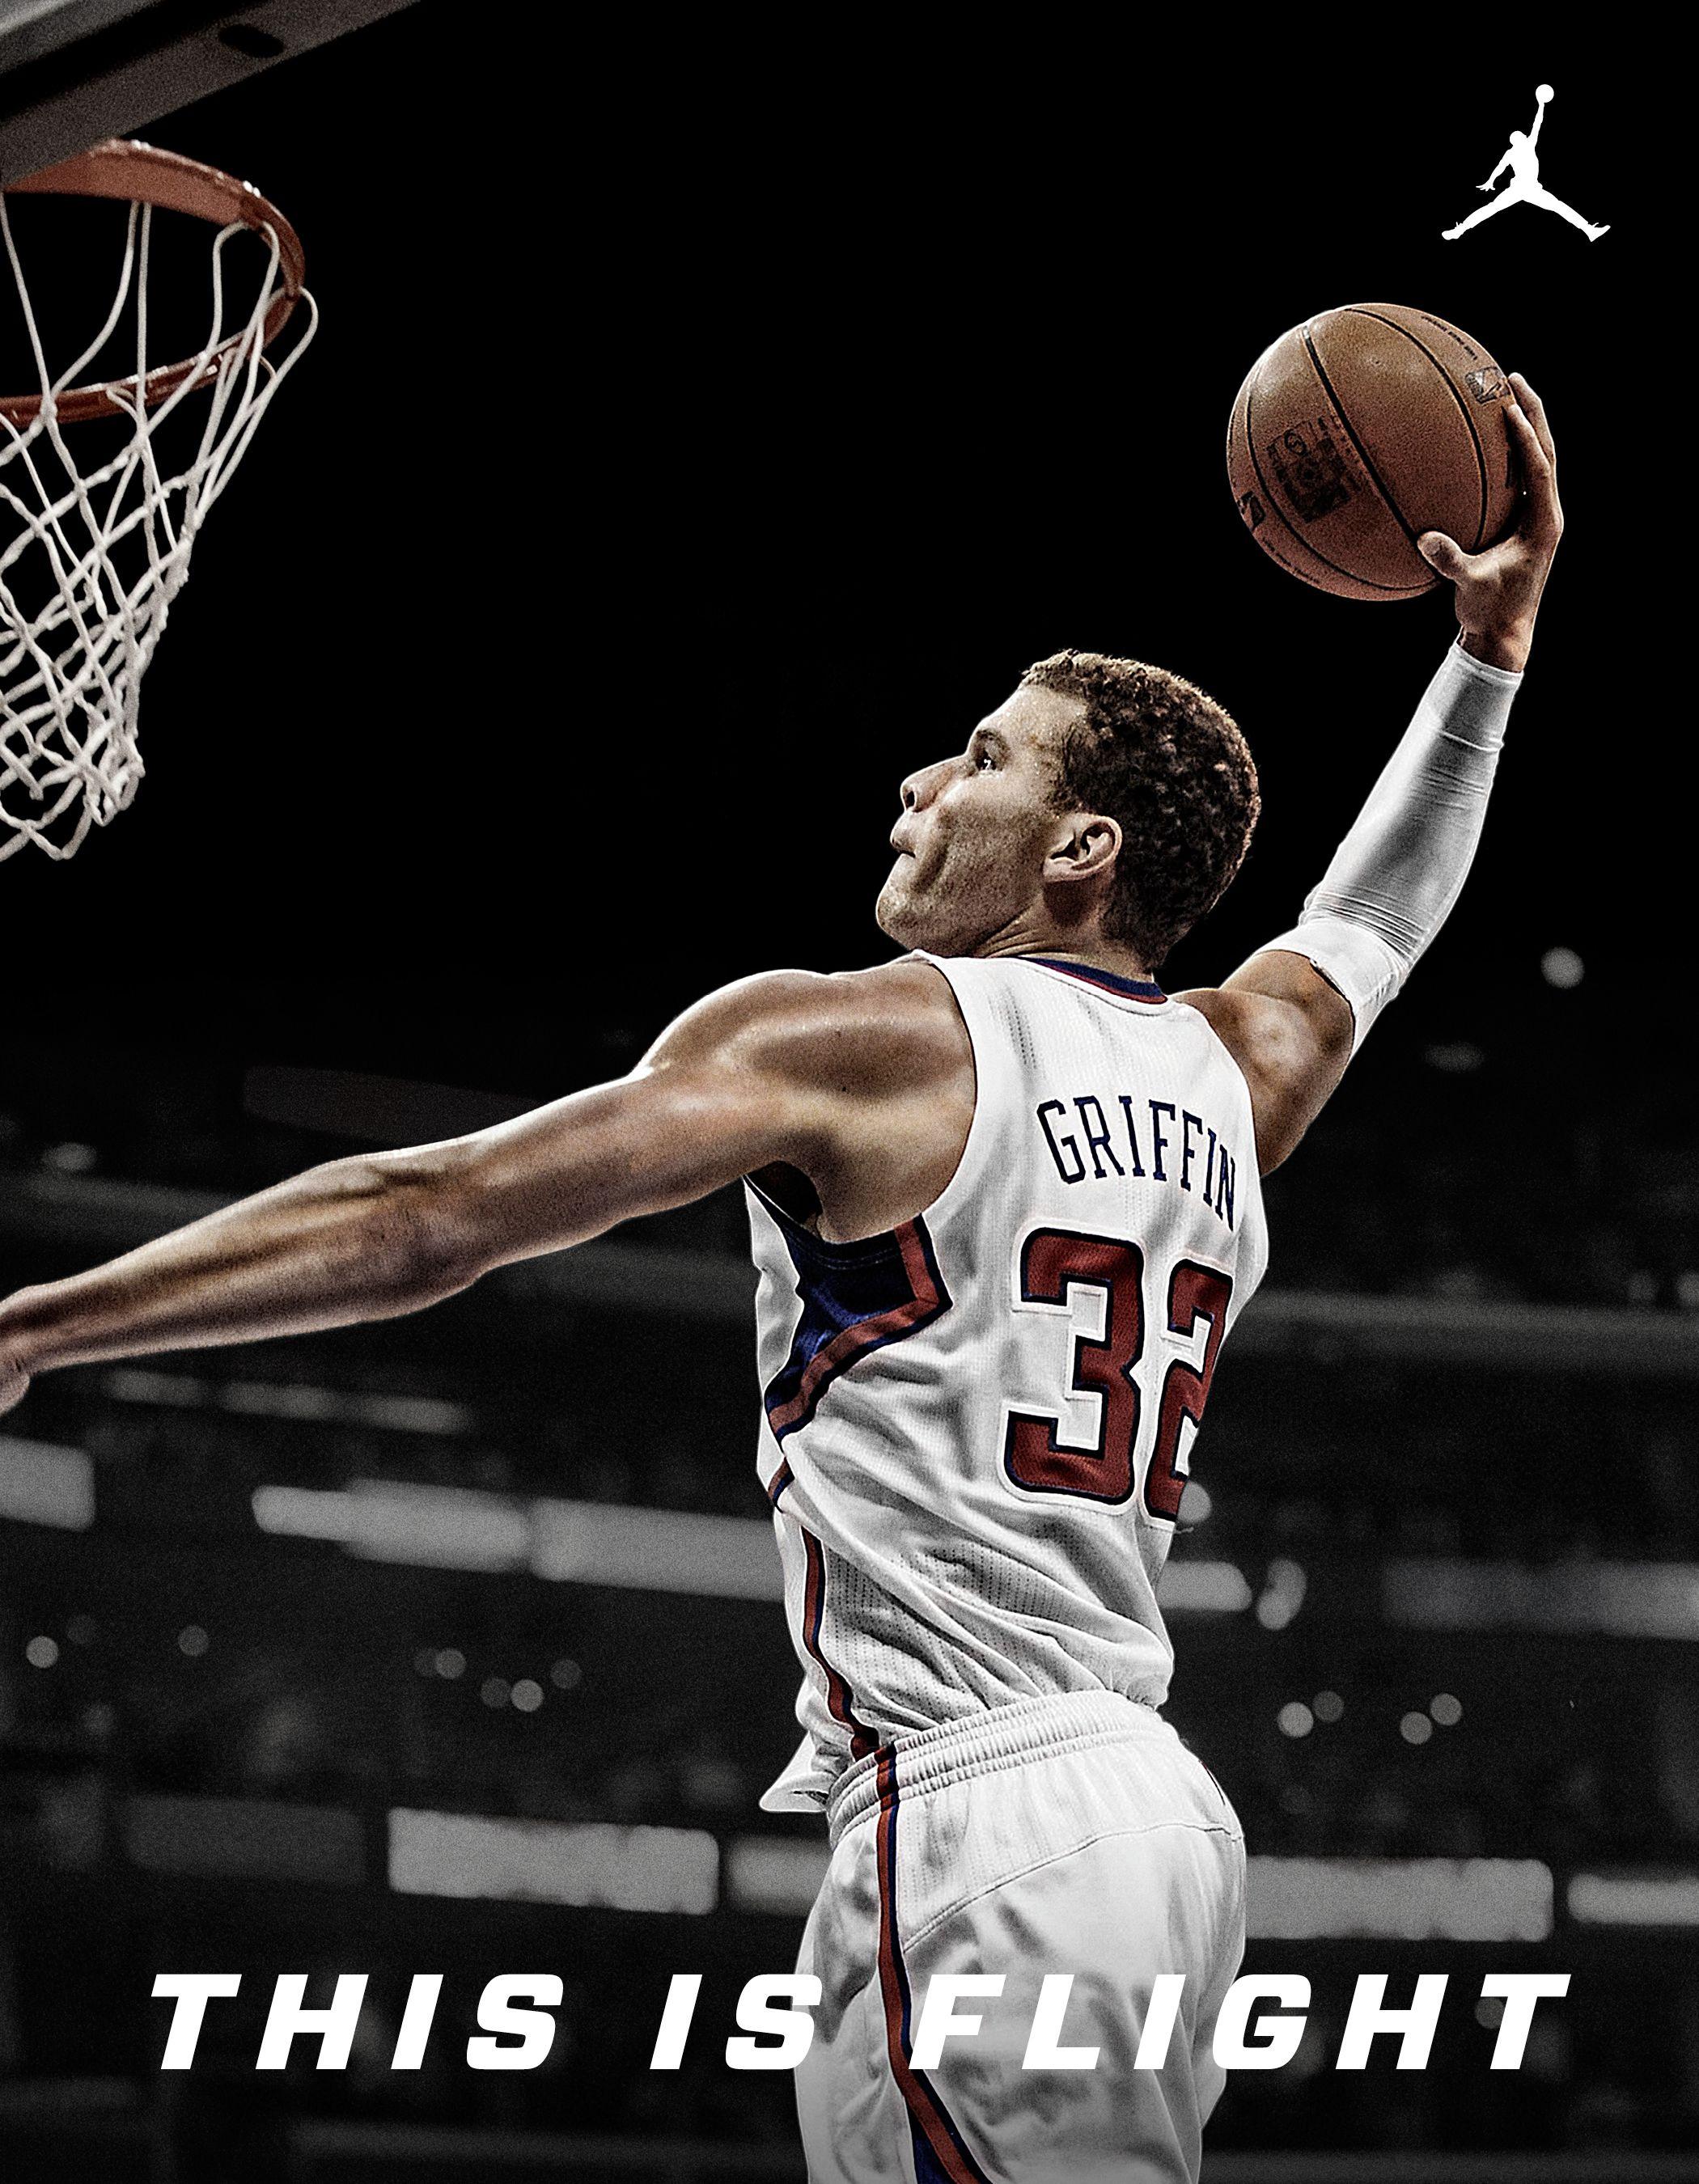 Jordan Brand Officially Welcomes Blake Griffin to its Roster